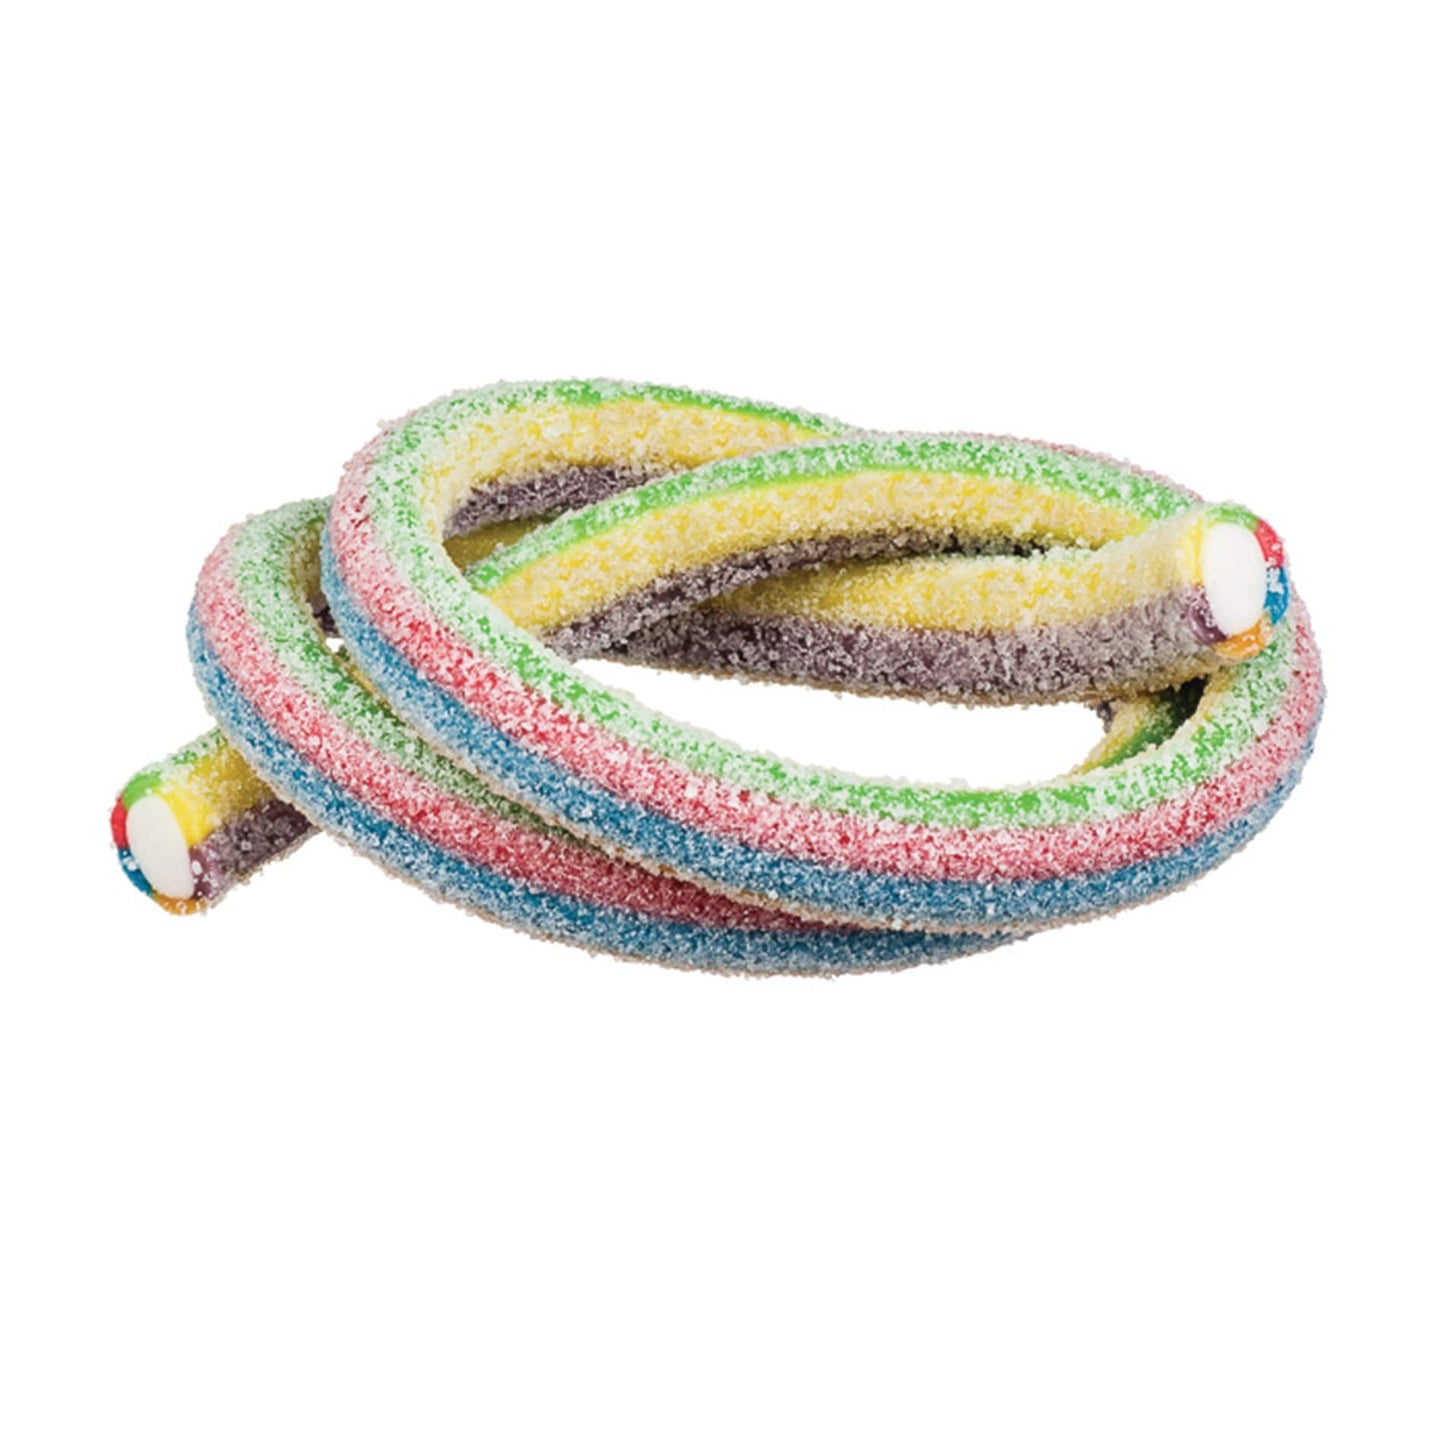 Novelty Concessions Gummy Rope SOUR SUNSHINE FRUIT / 1 Pack (30 pieces) Meeega Cables European Chewy Rope Candy - Box of 30 individually wrapped Meeega Cables, each over 2-feet long cups with lids and straws